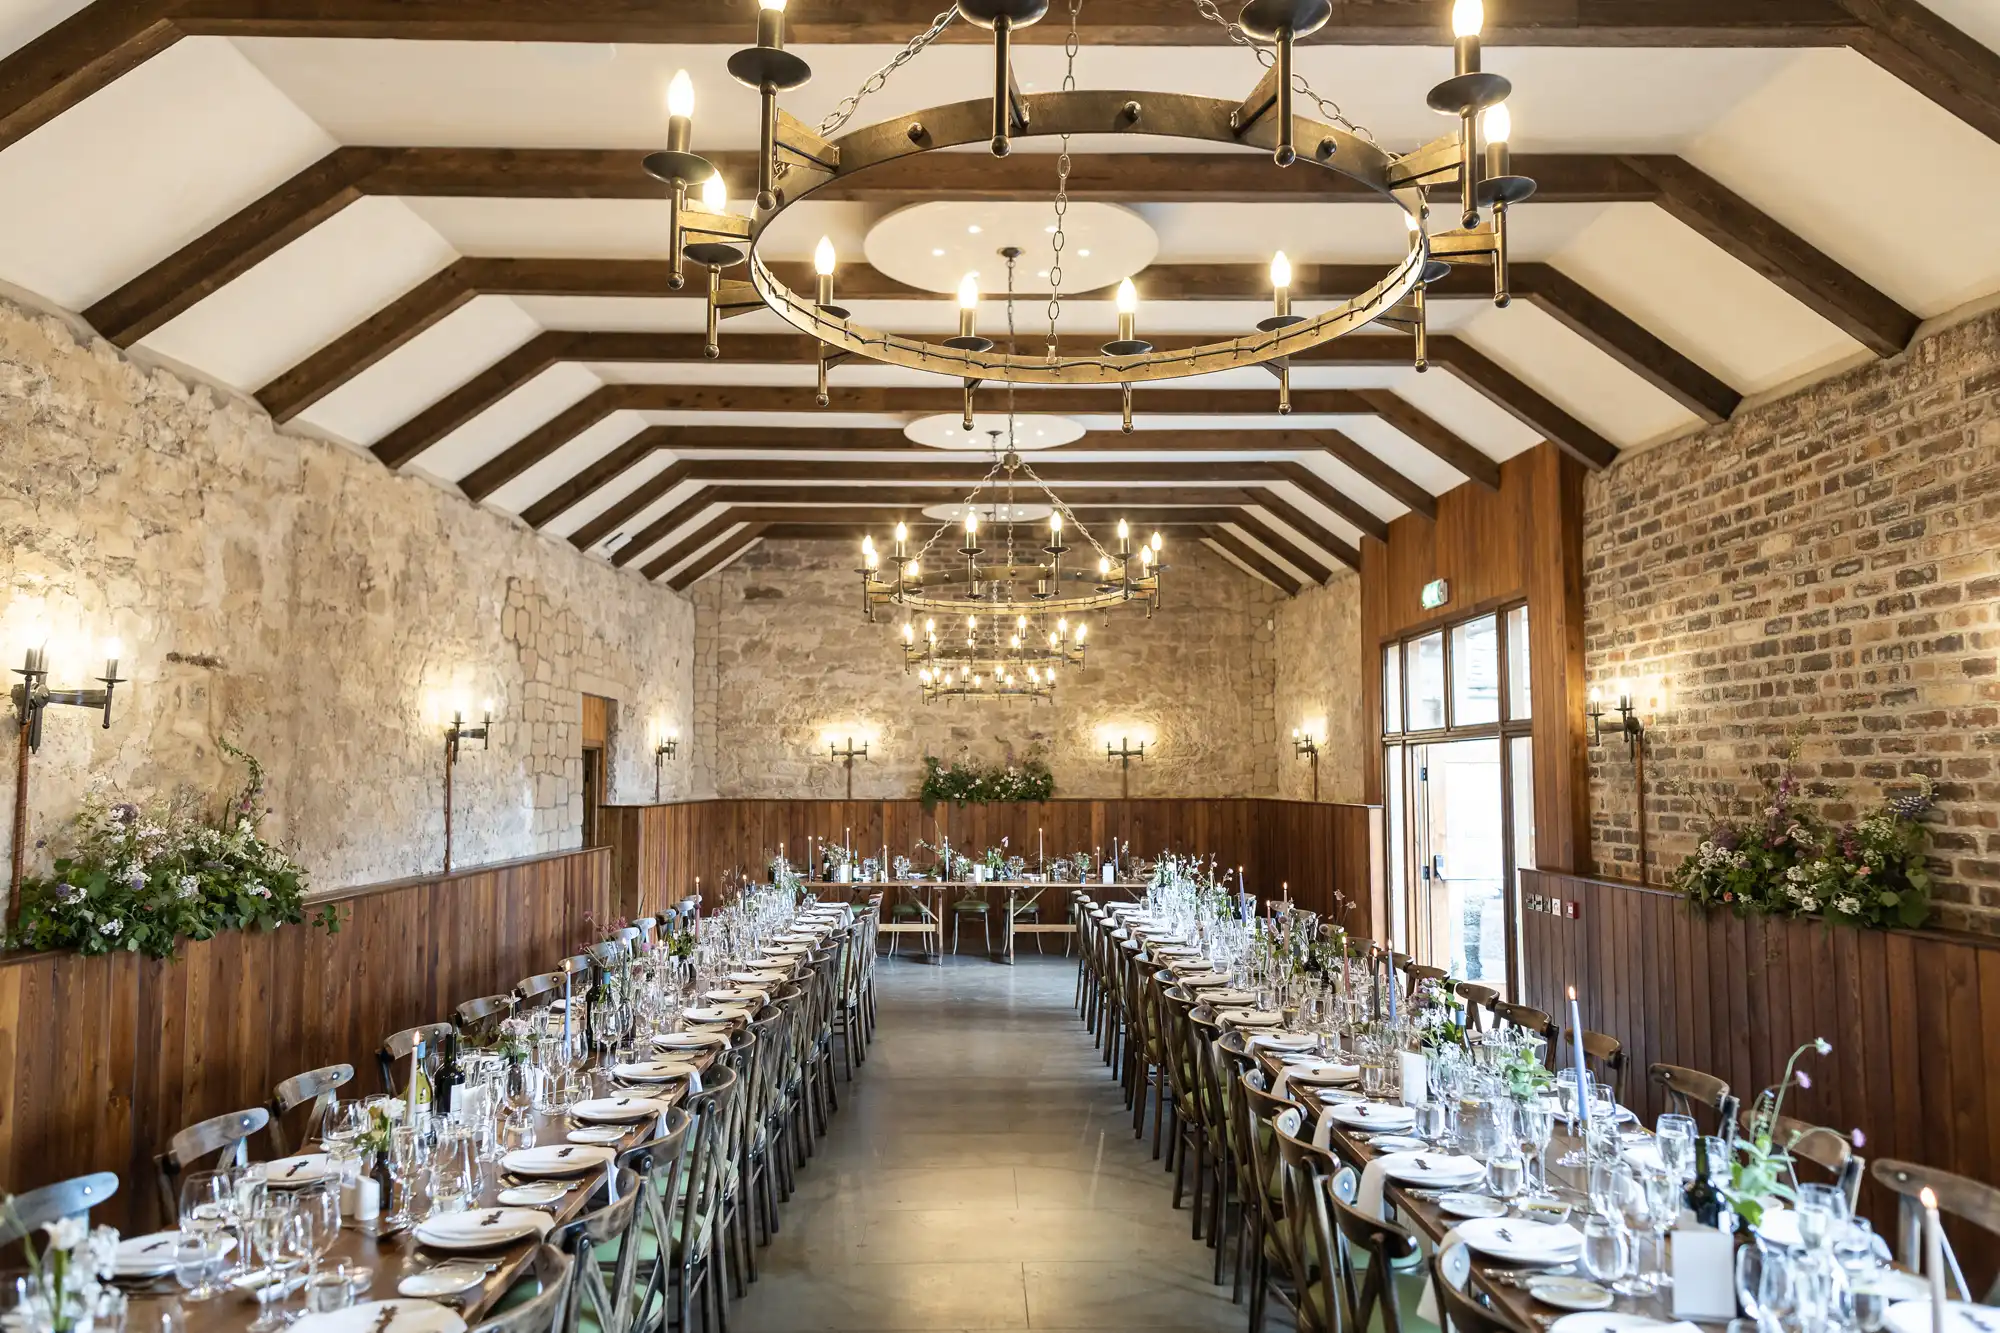 Elegant dining hall with exposed brick walls and wooden beams, featuring long tables set for a meal, adorned with candles and floral arrangements.